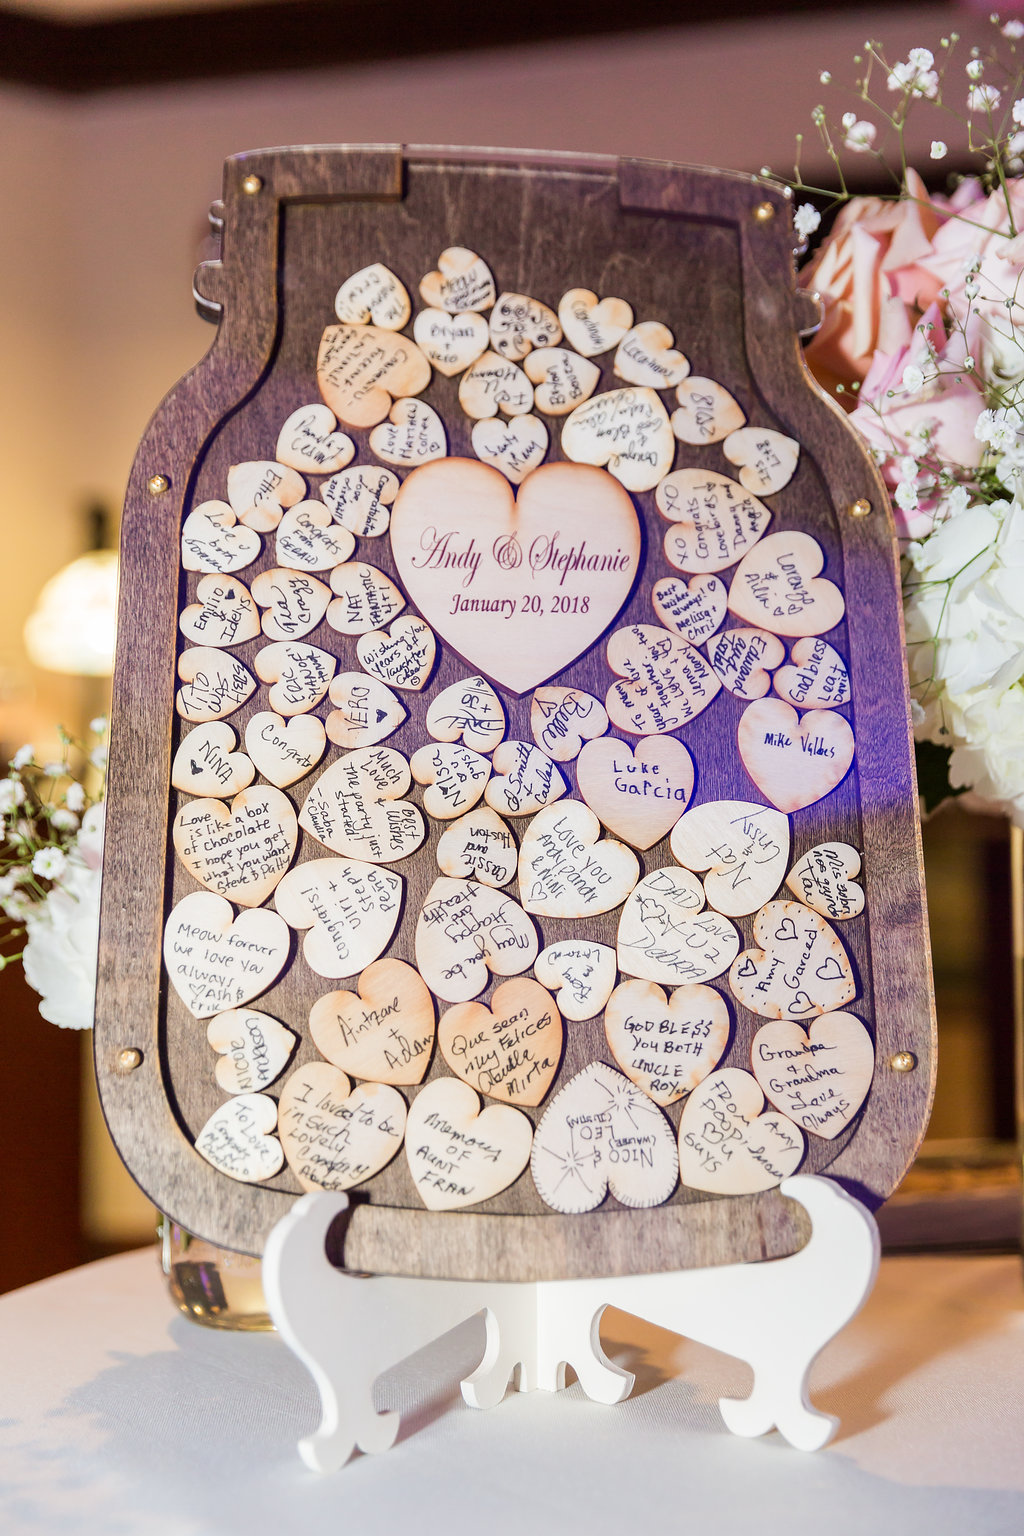 This wedding guest book was a custom mason jar frame with small wood hearts for people to sign and drop into the shadow box display